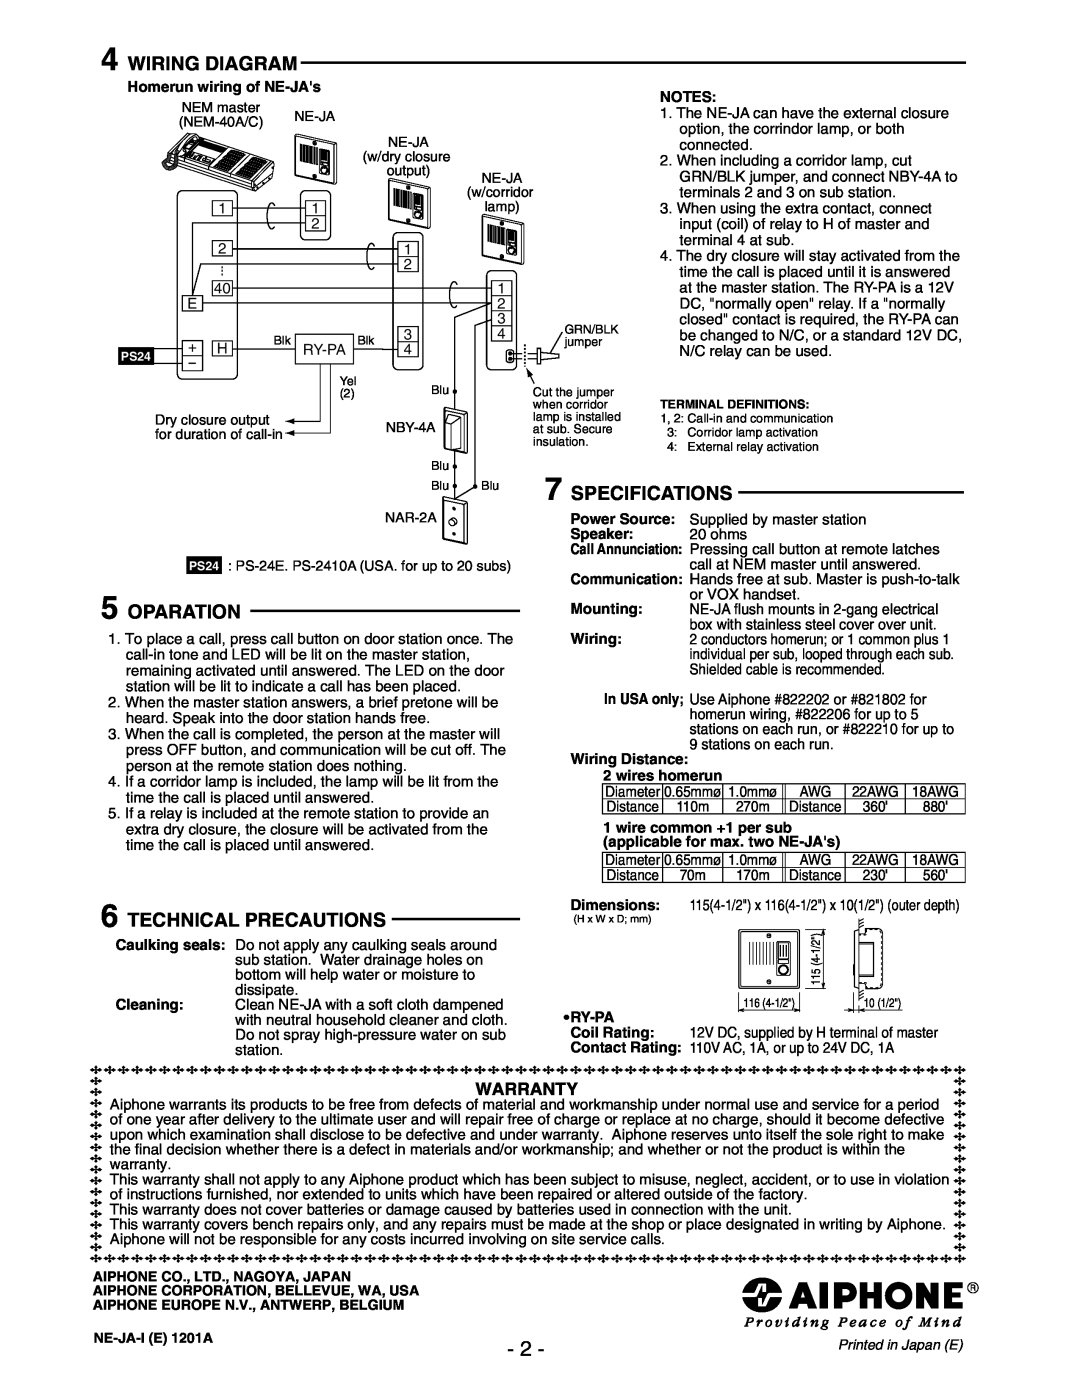 Aiphone NE-JA operation manual Wiring Diagram, Specifications, Oparation, Technical Precautions, Warranty 